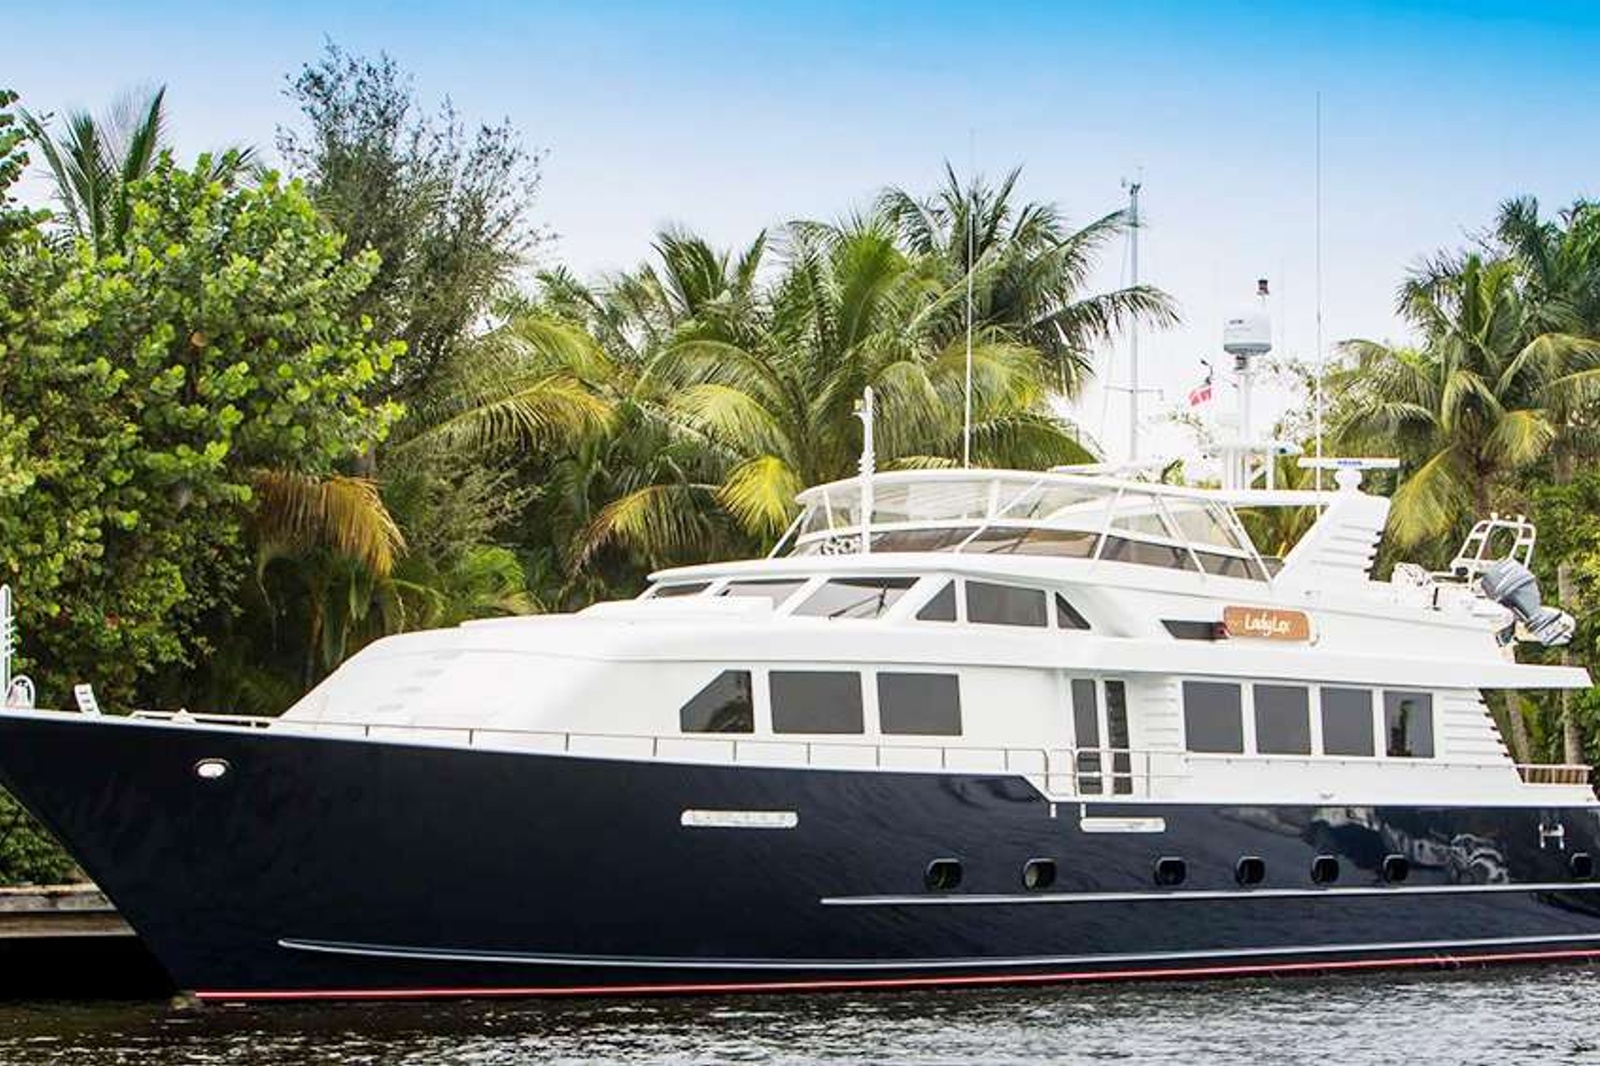 LADY LEX is a luxurious, 100.07ft /30.5m motor yacht, custom built by Broward and last refitted in 2017. This luxury yacht features performance engineering, a sophisticated exterior design and stately interiors.

Lady Lex accommodates up to 8 guests in 4 ensuite staterooms, including a full-beam primary suite, a forward VIP with raised queen bed, a guest queen and one twin. Classic styling and beautiful furnishings featured throughout create a plush, relaxing atmosphere.

For the utmost in cruising comfort and stability, LADY LEX features an ultra-modern stabilization system that reduces roll motion effect. With a cruising speed of 16 knots and a maximum speed of 19 knots, she’s ideal for exploring Florida and the Bahamas.  

LADY LEX is run by a professional crew of three who have been working together for many years. Their level of expertise, dedication and seamless teamwork make chartering with them a privilege. 
